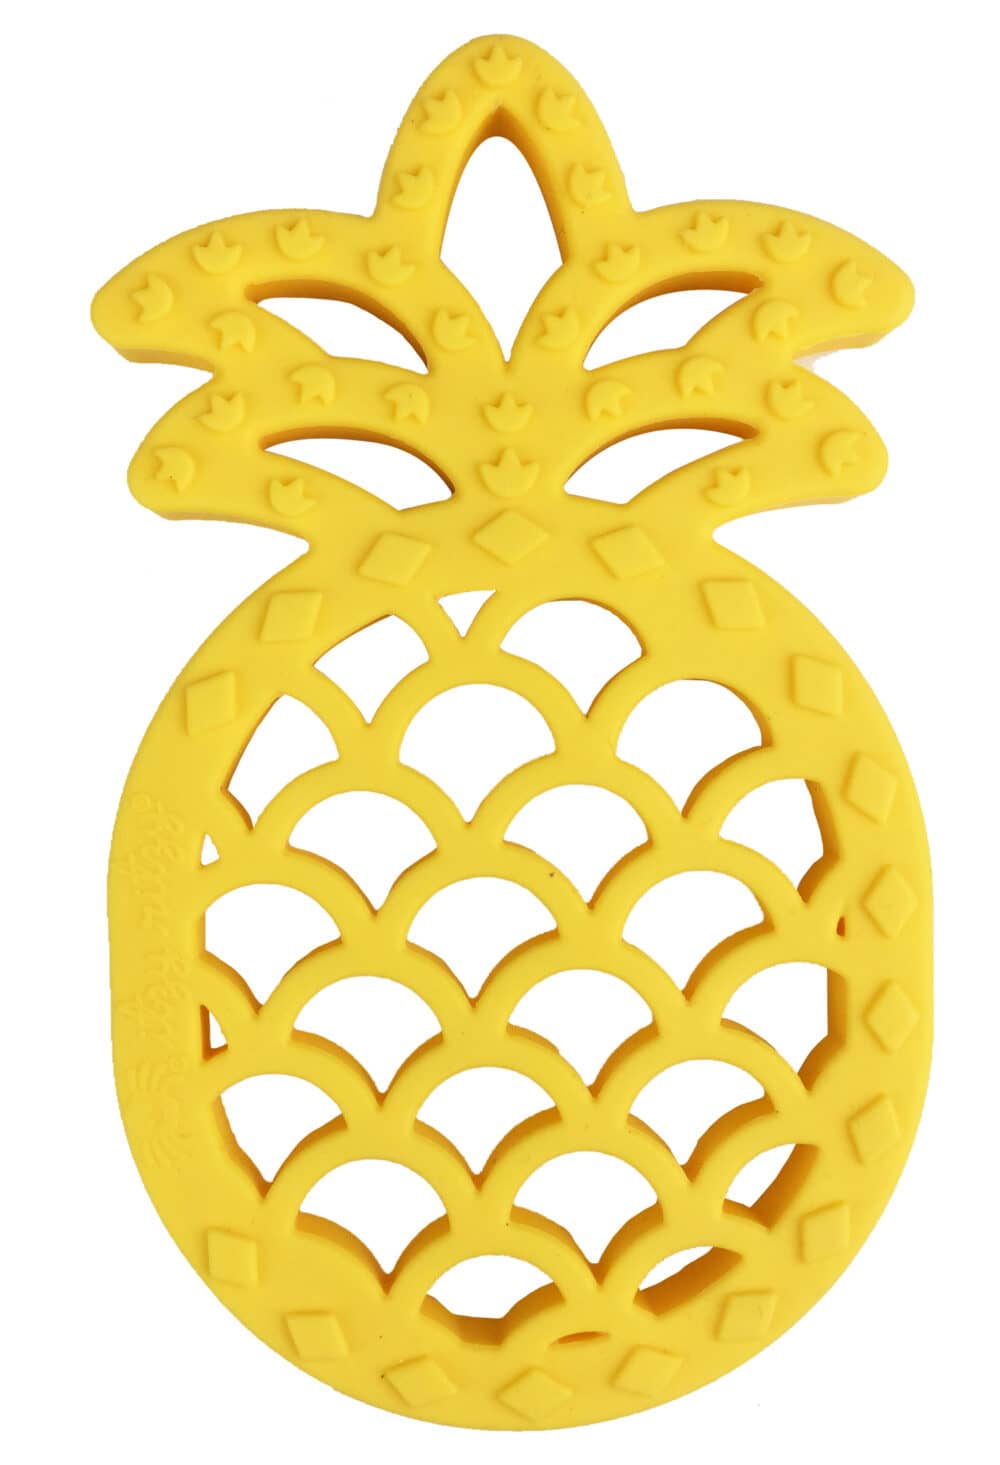 A yellow pineapple shaped teether on a white background.